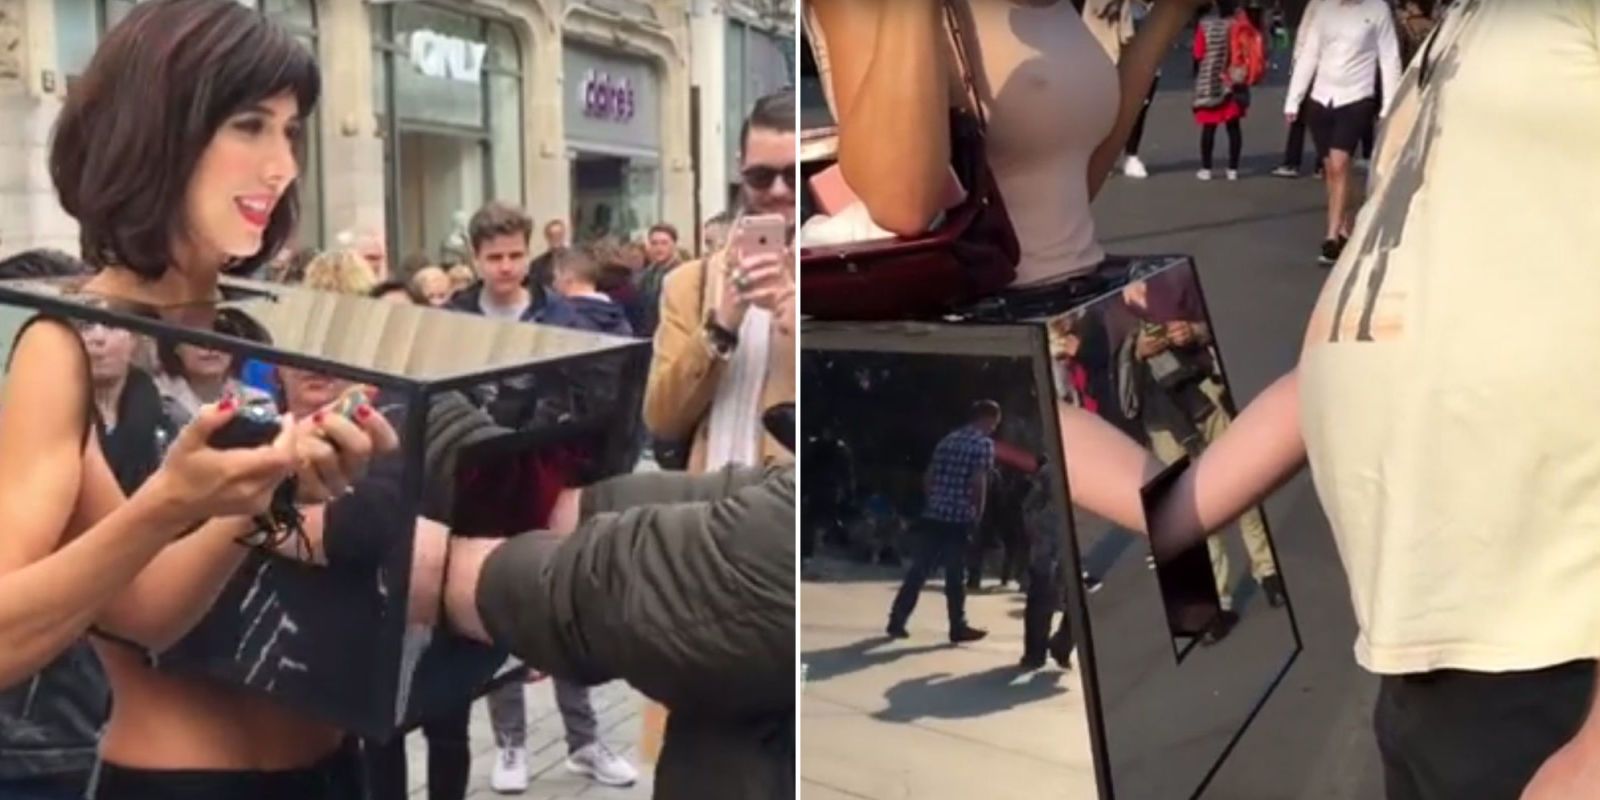 Artist Milo Moire Let People Touch Her Vagina in Public